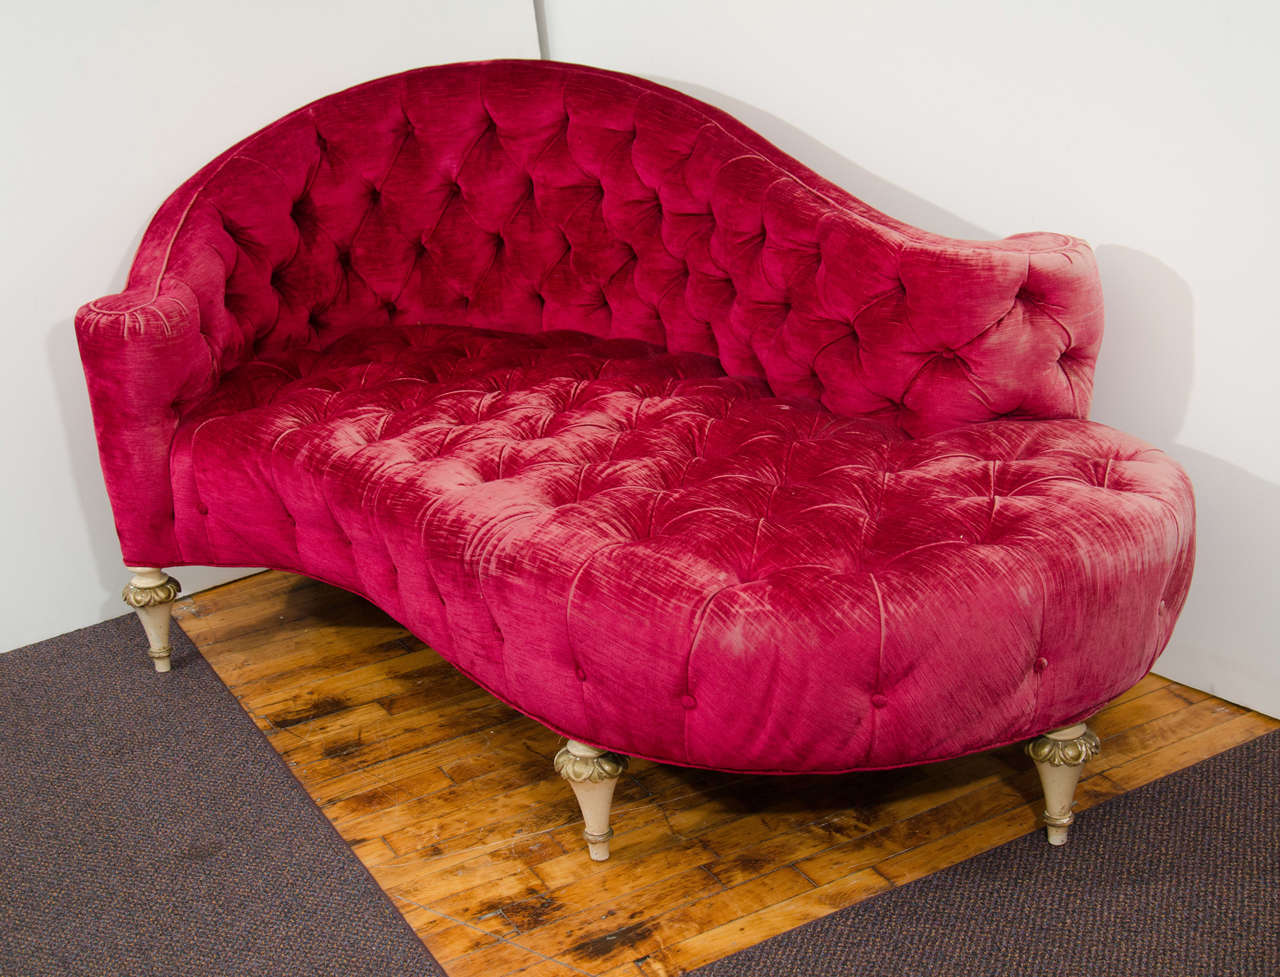 A vintage magenta button-tufted chaise recamier-form lounge chair with gilt wood feet. Original vintage condition with age appropriate wear; distressed fabric and some missing buttons